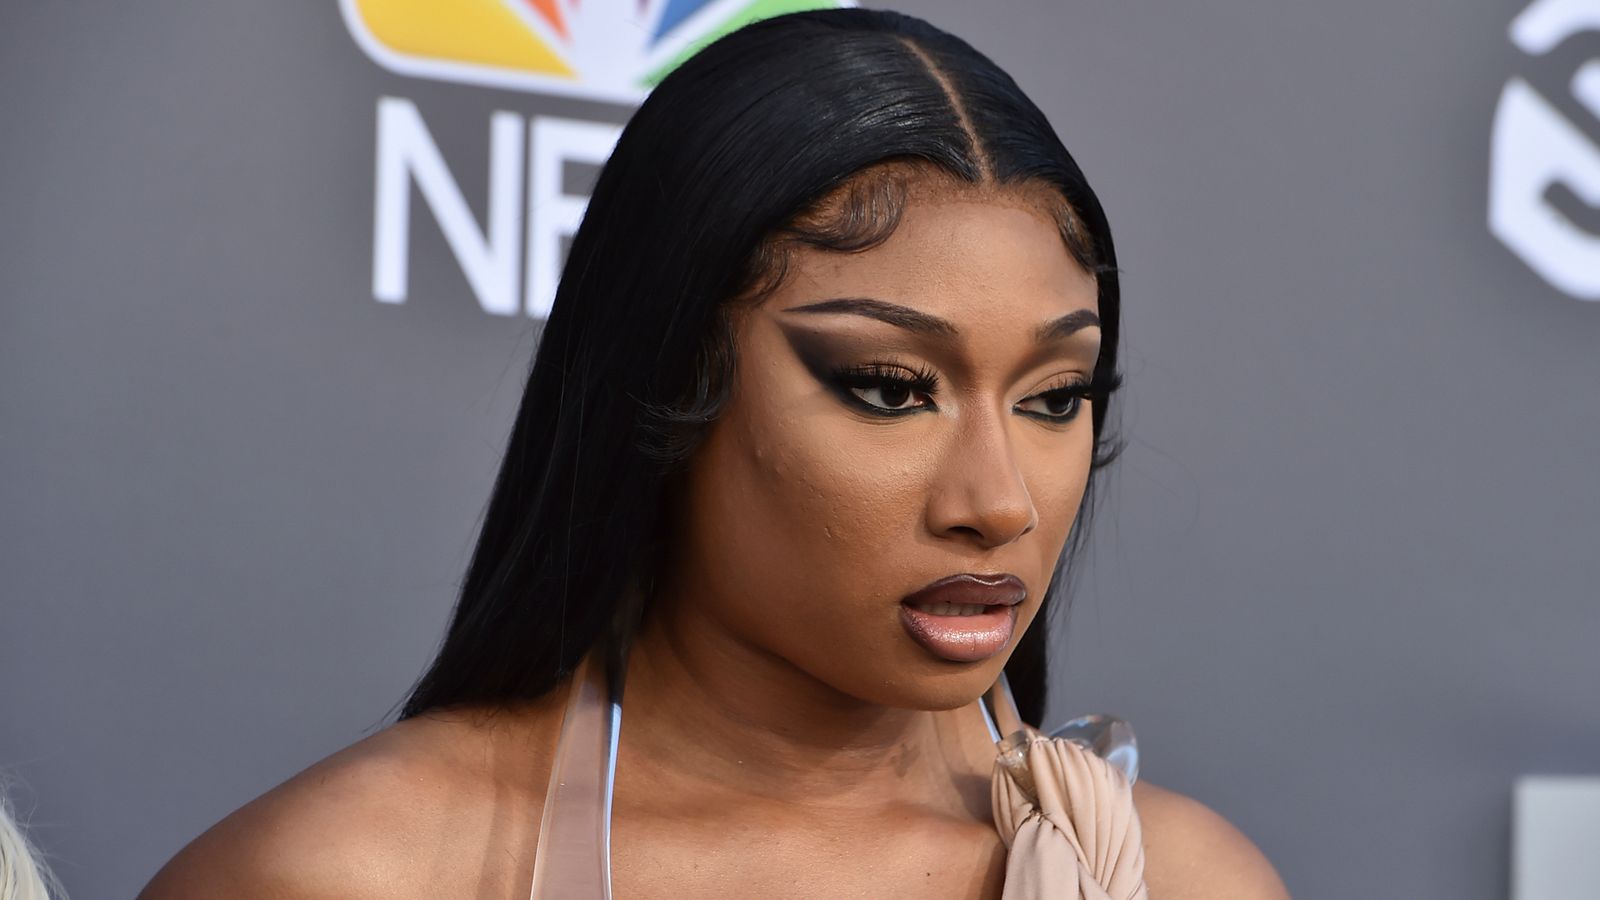 Megan Thee Stallion tells court fellow rapper Tory Lanez told her to 'dance' as he shot at her feet